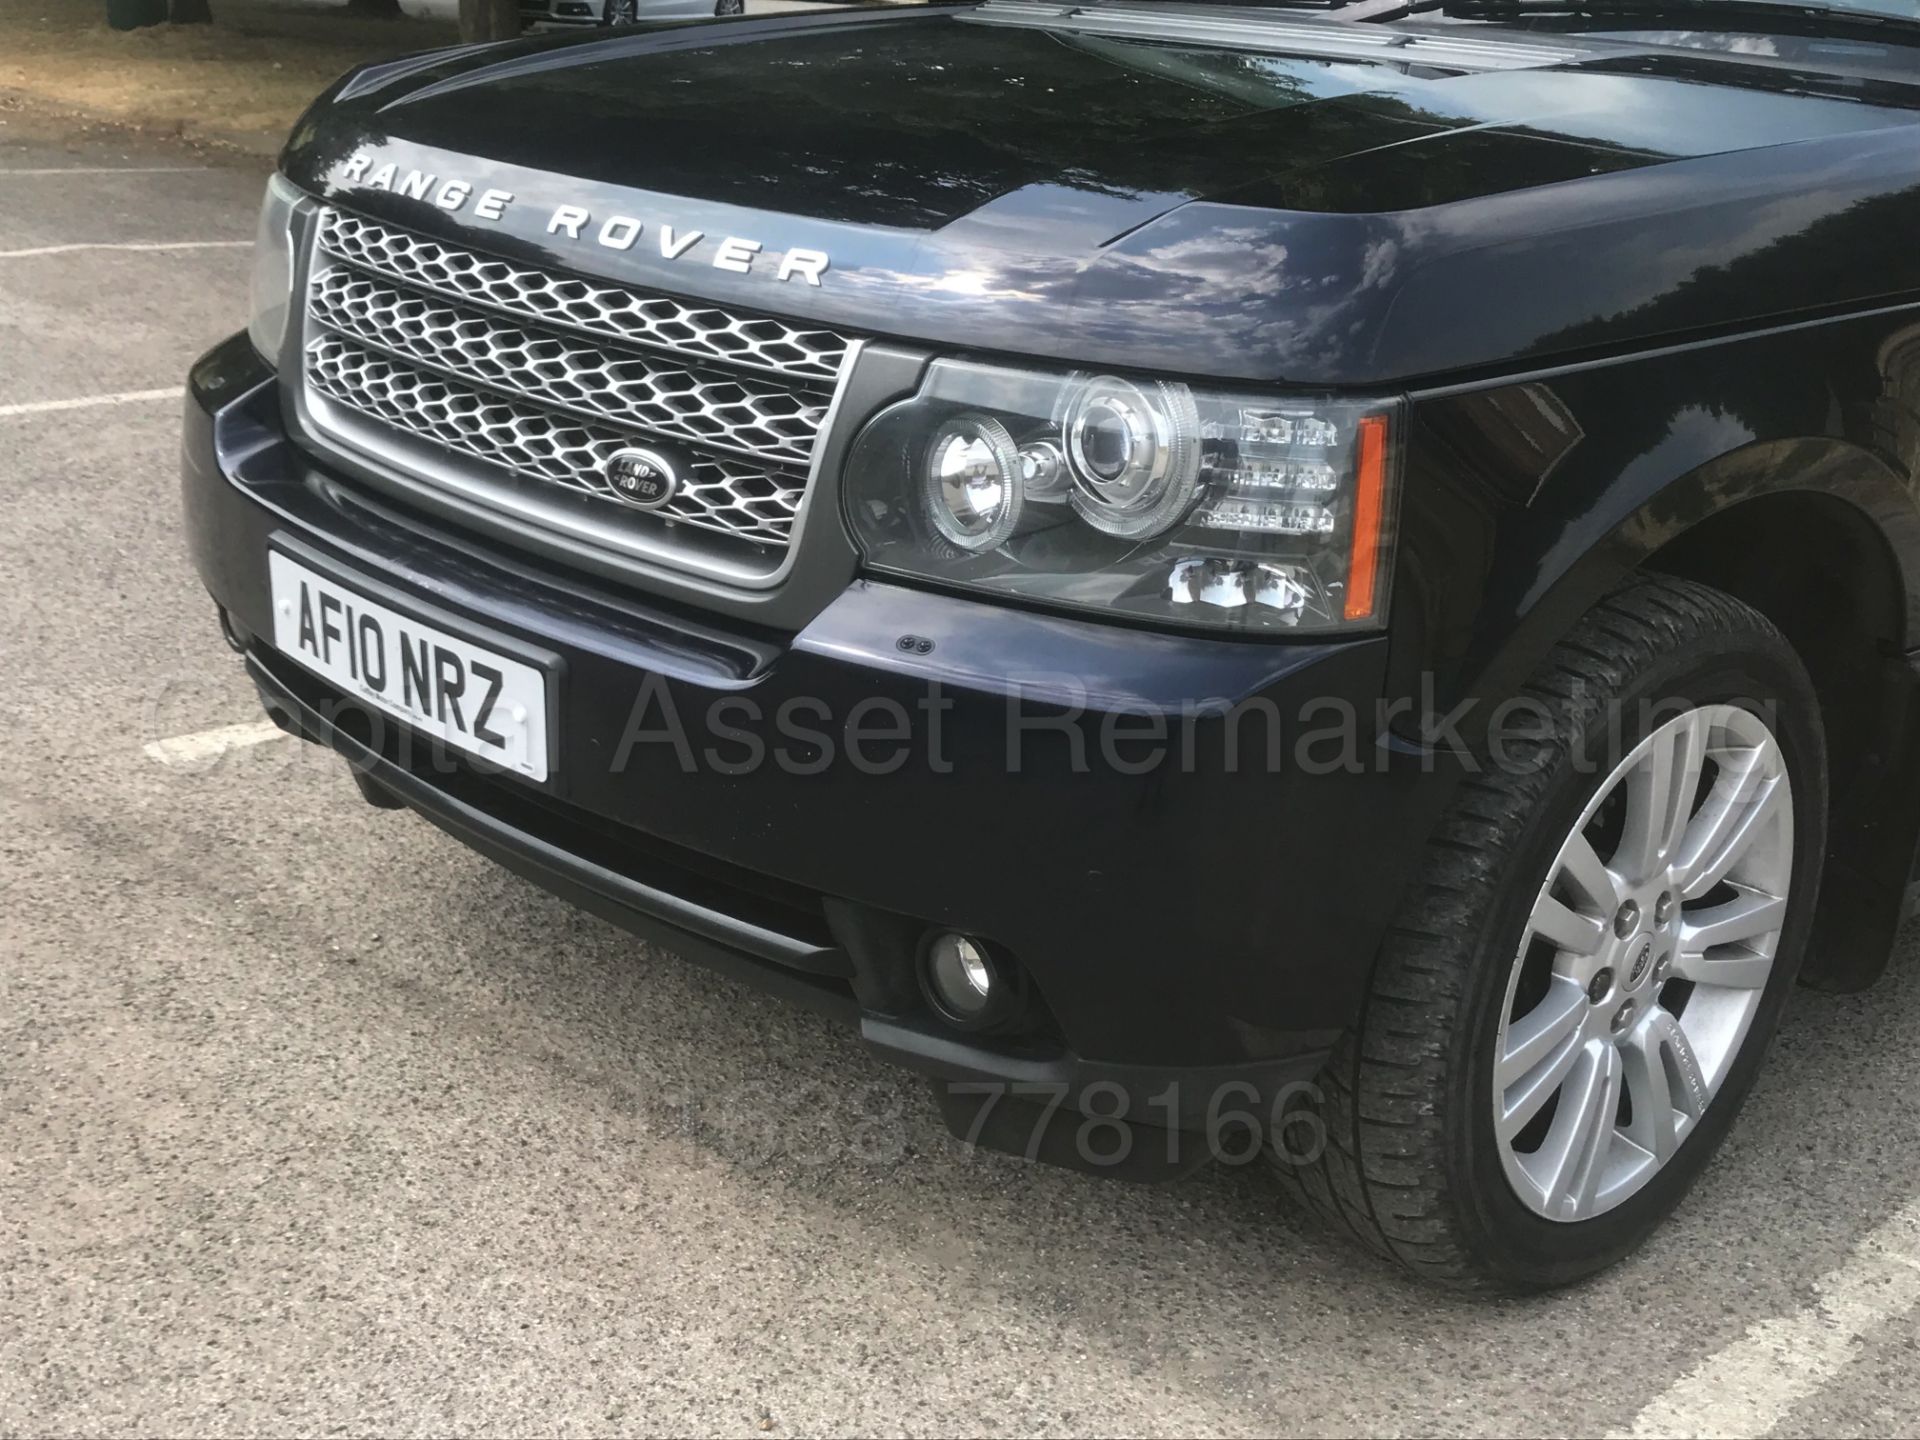 (On Sale) RANGE ROVER VOGUE **SE EDITION** (2010 - FACELIFT EDITION) 'TDV8 - 268 BHP - AUTO' **WOW** - Image 16 of 62